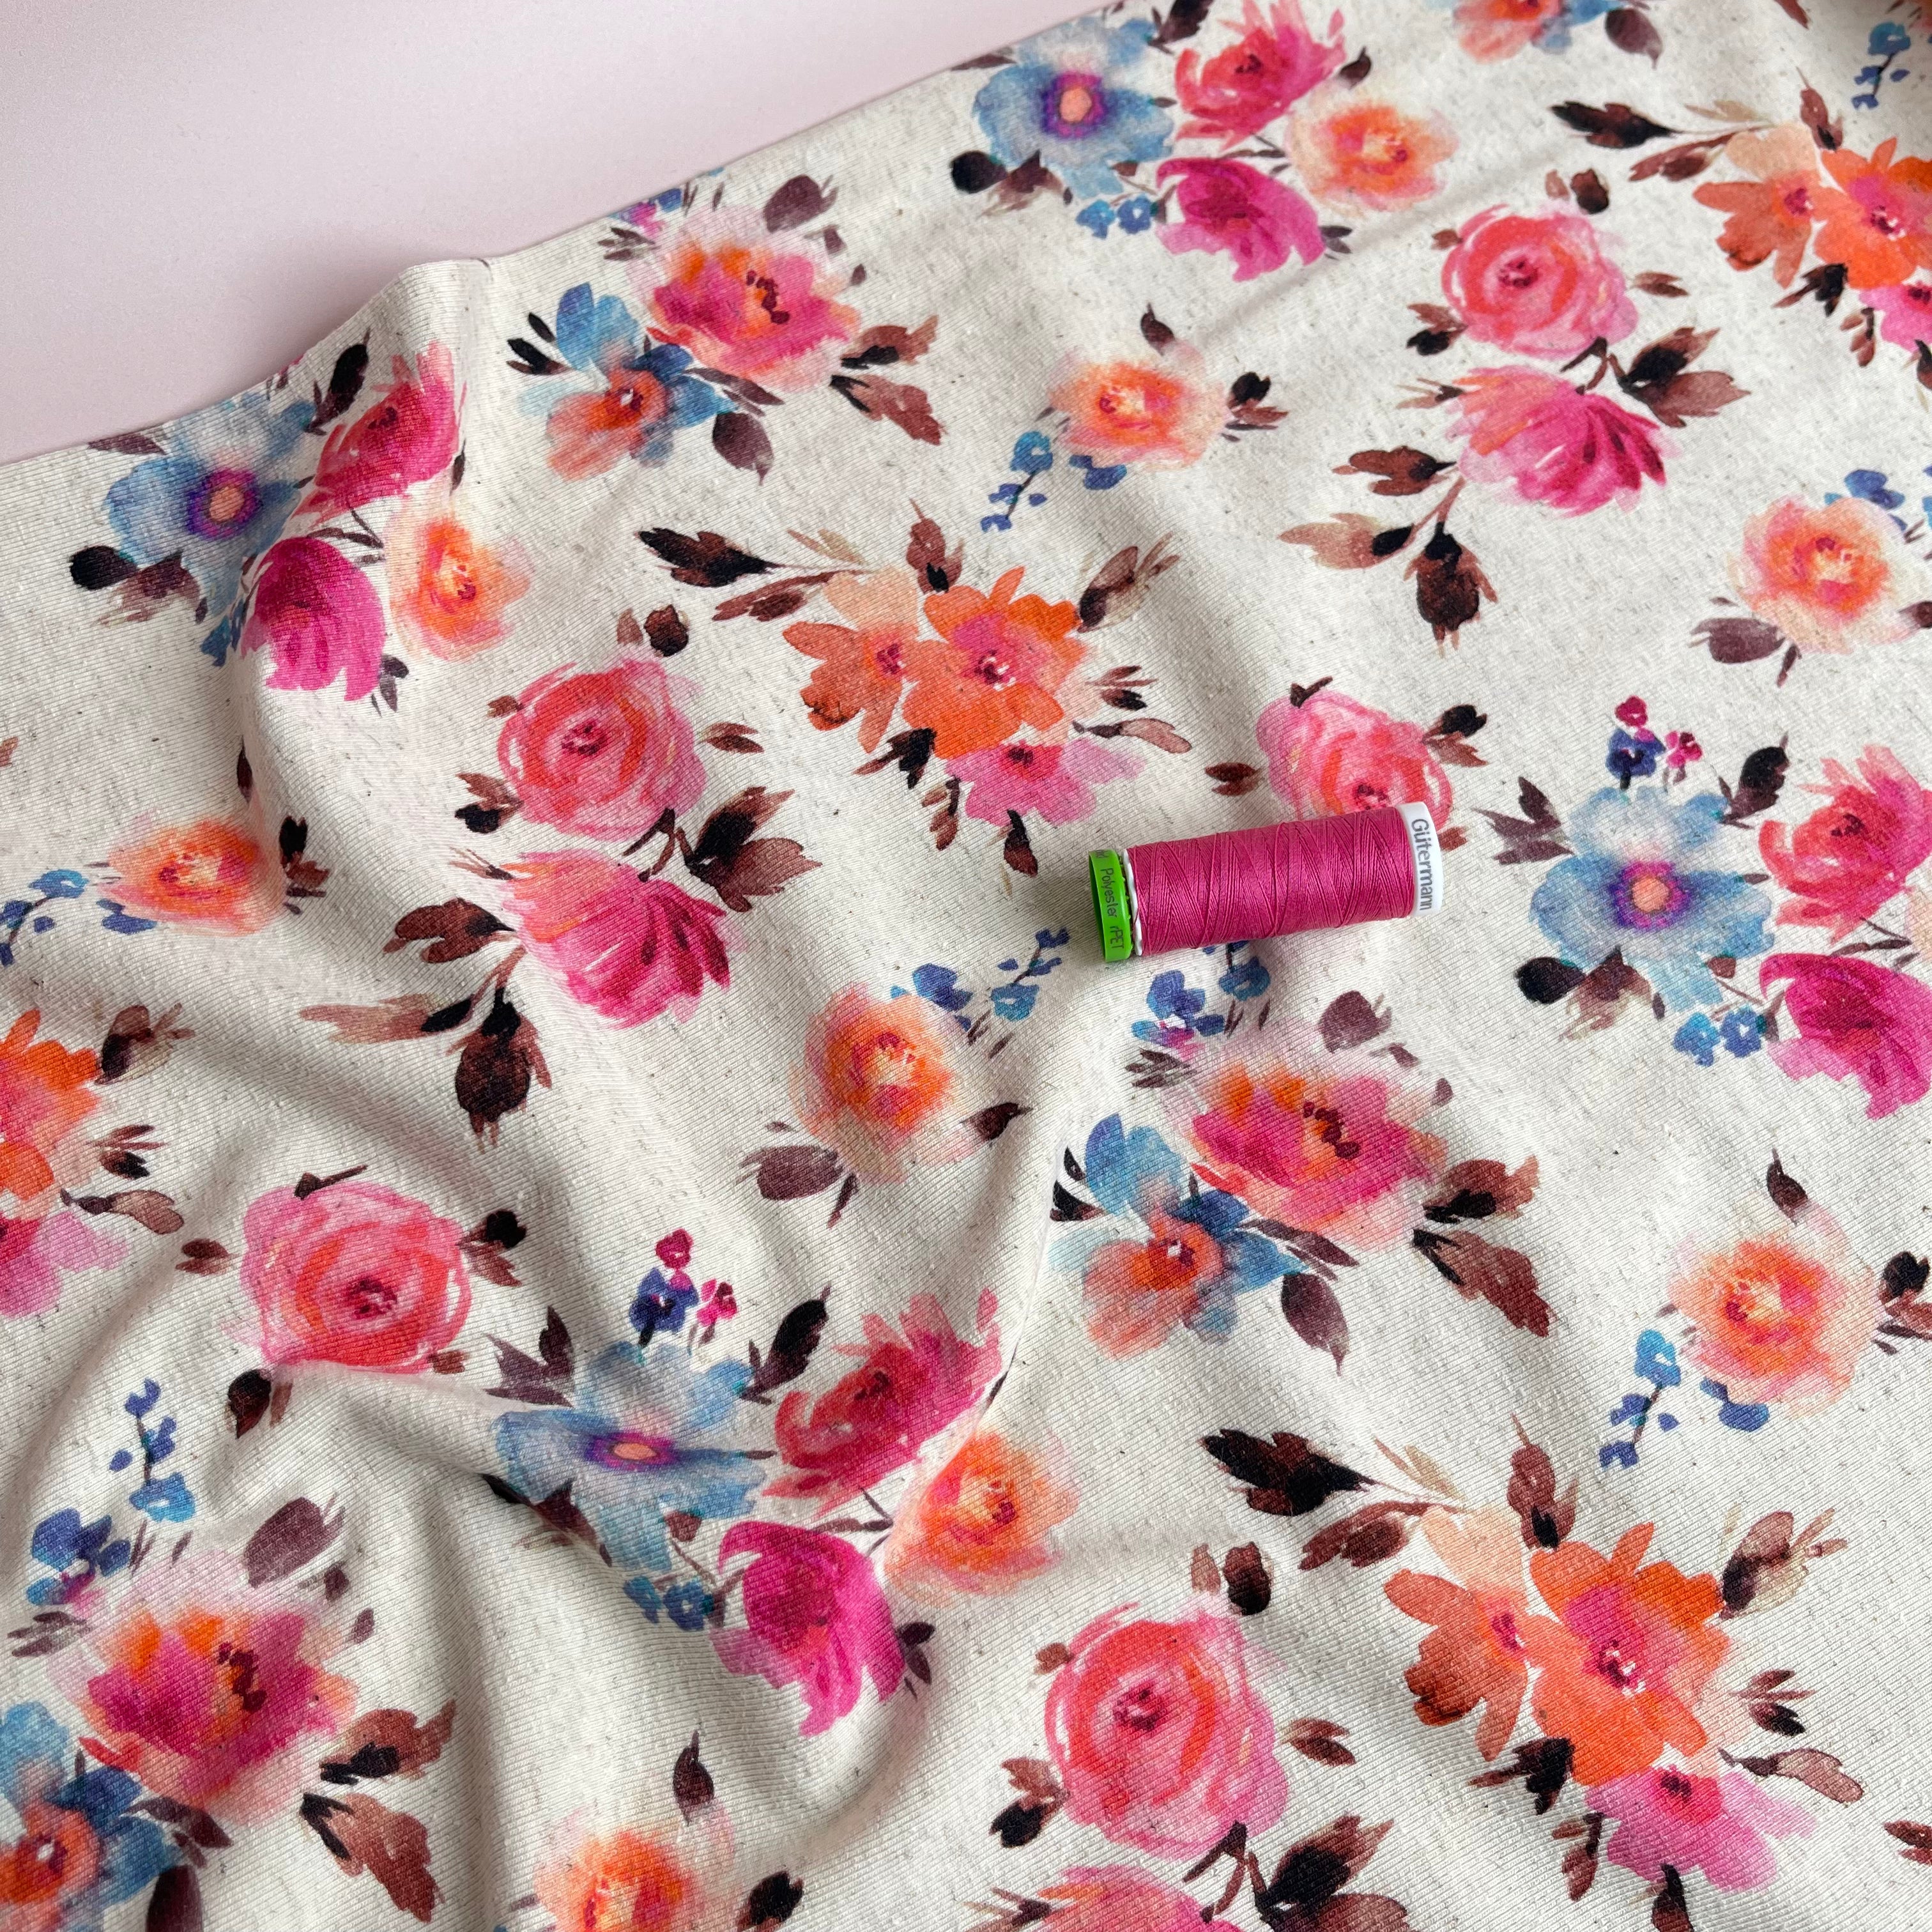 REMNANT 1.2 Metres - Painted Flowers in Pink Linen Cotton Jersey